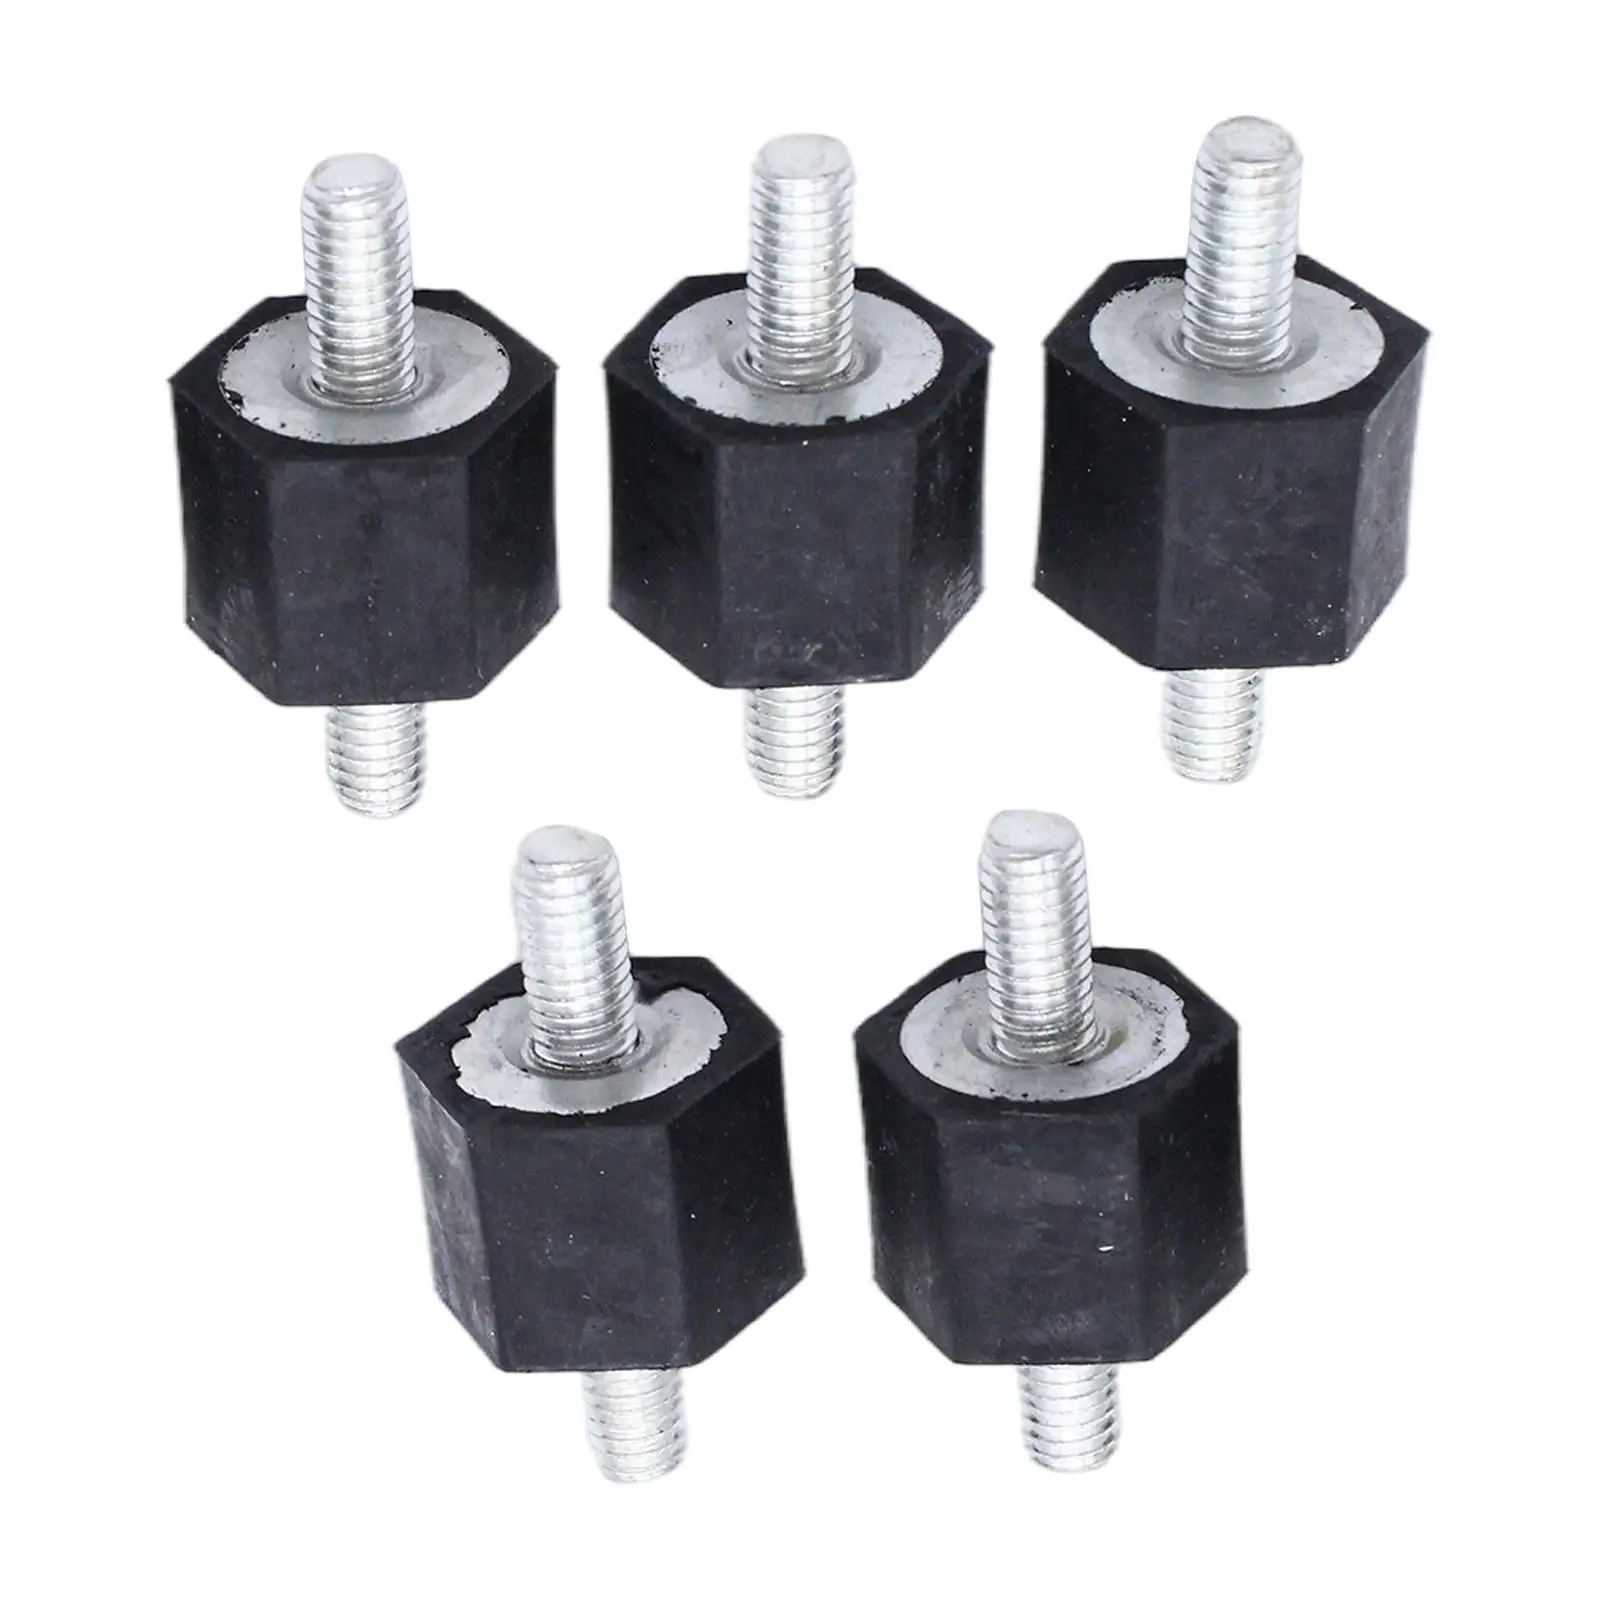 5 Pieces Fuel Pump Engine Cover Rubber Mounts Isolator Mounts for Golf MK2 Engine Panel